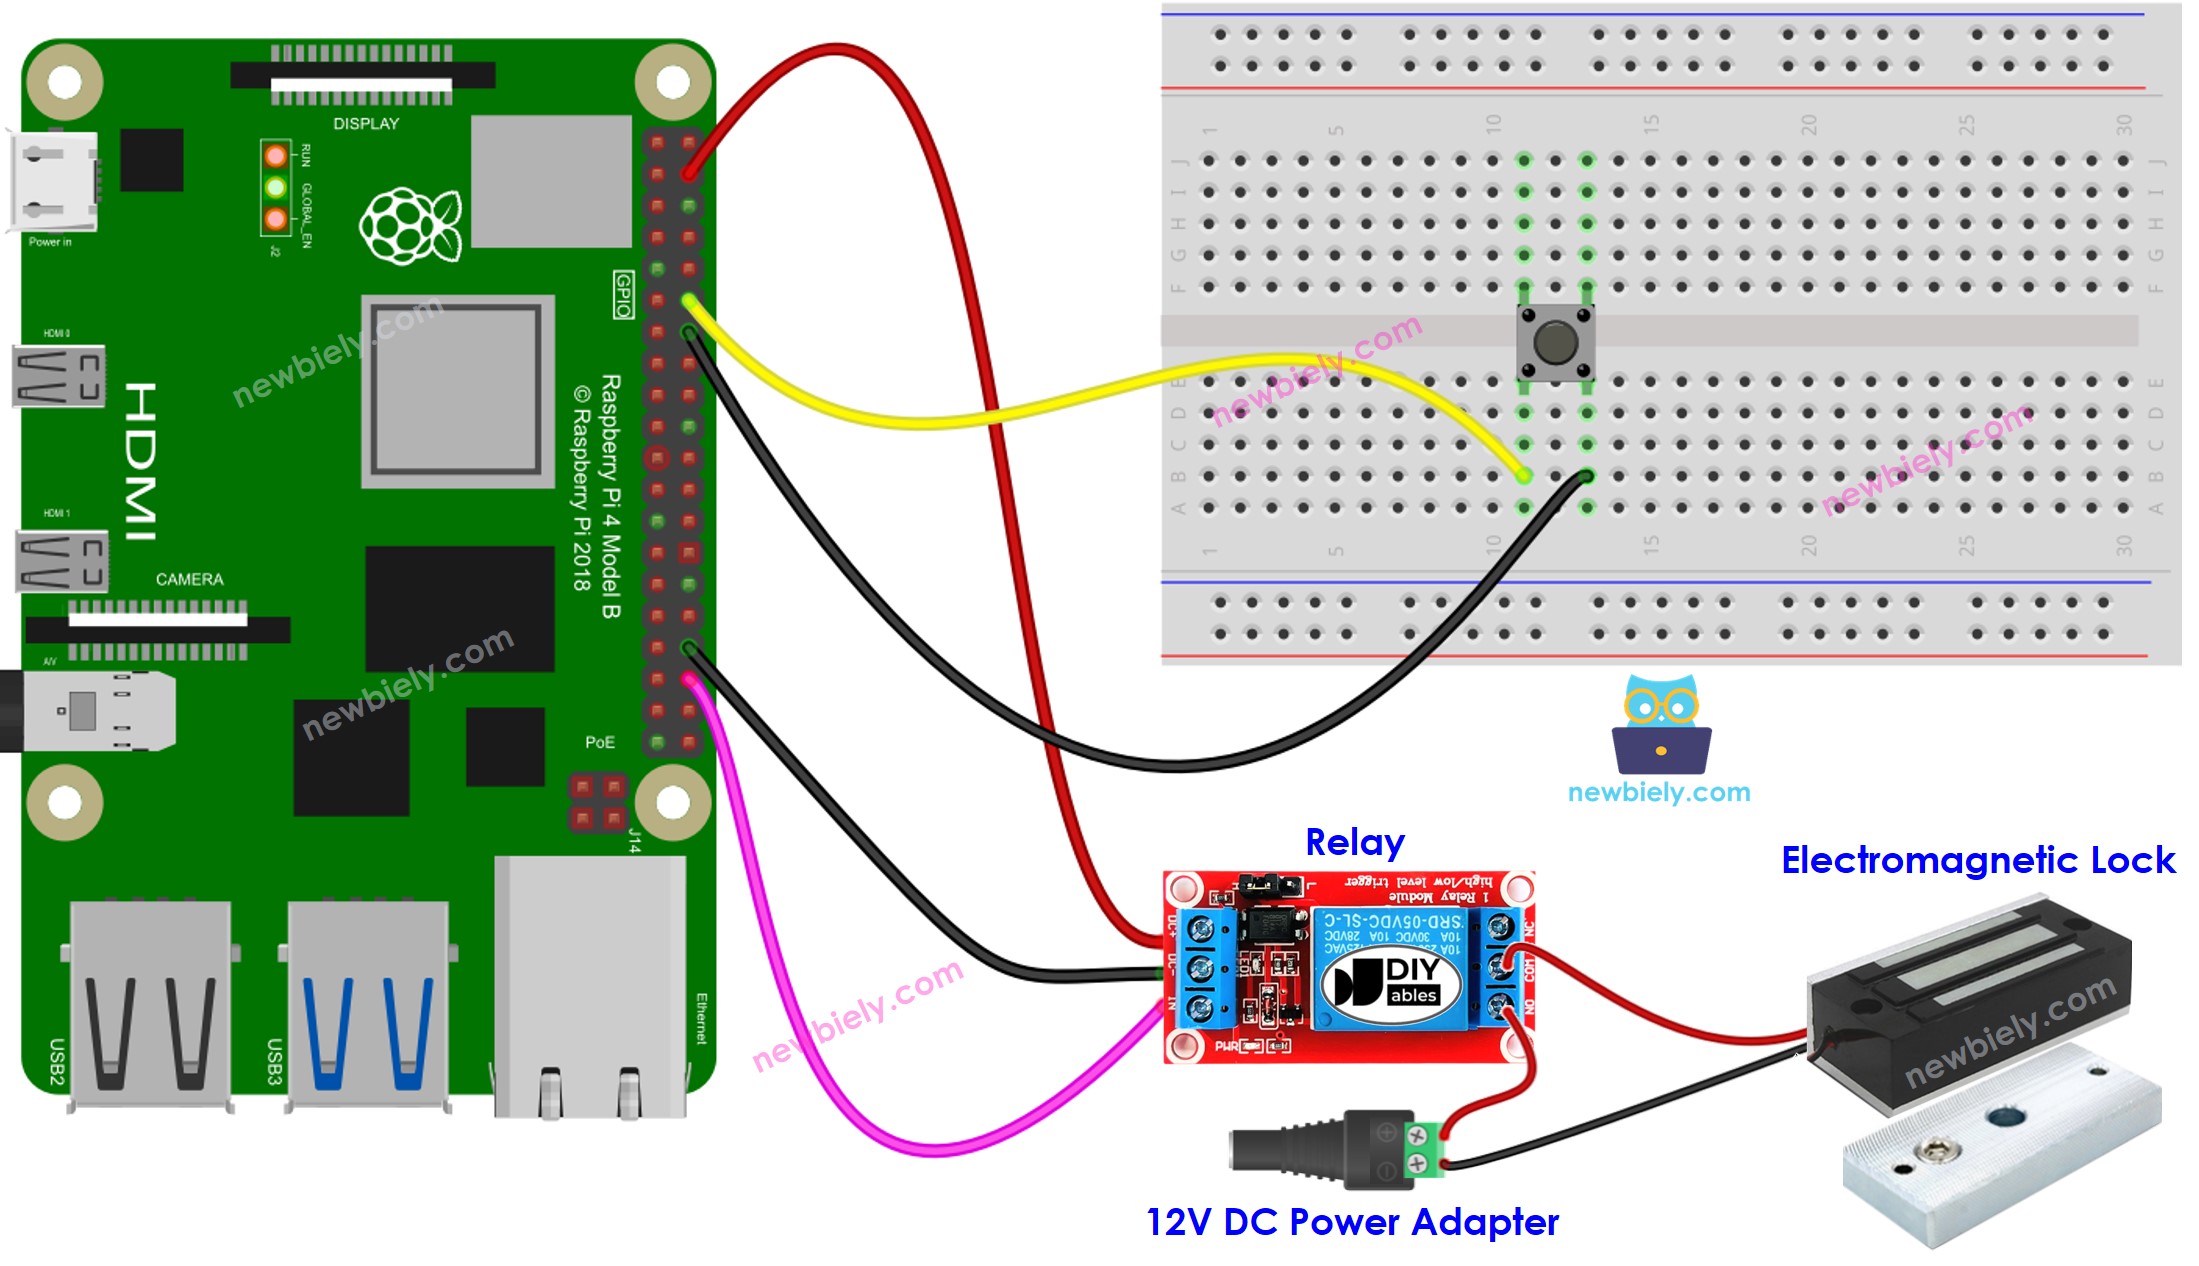 The wiring diagram between Raspberry Pi and Button Electromagnetic Lock